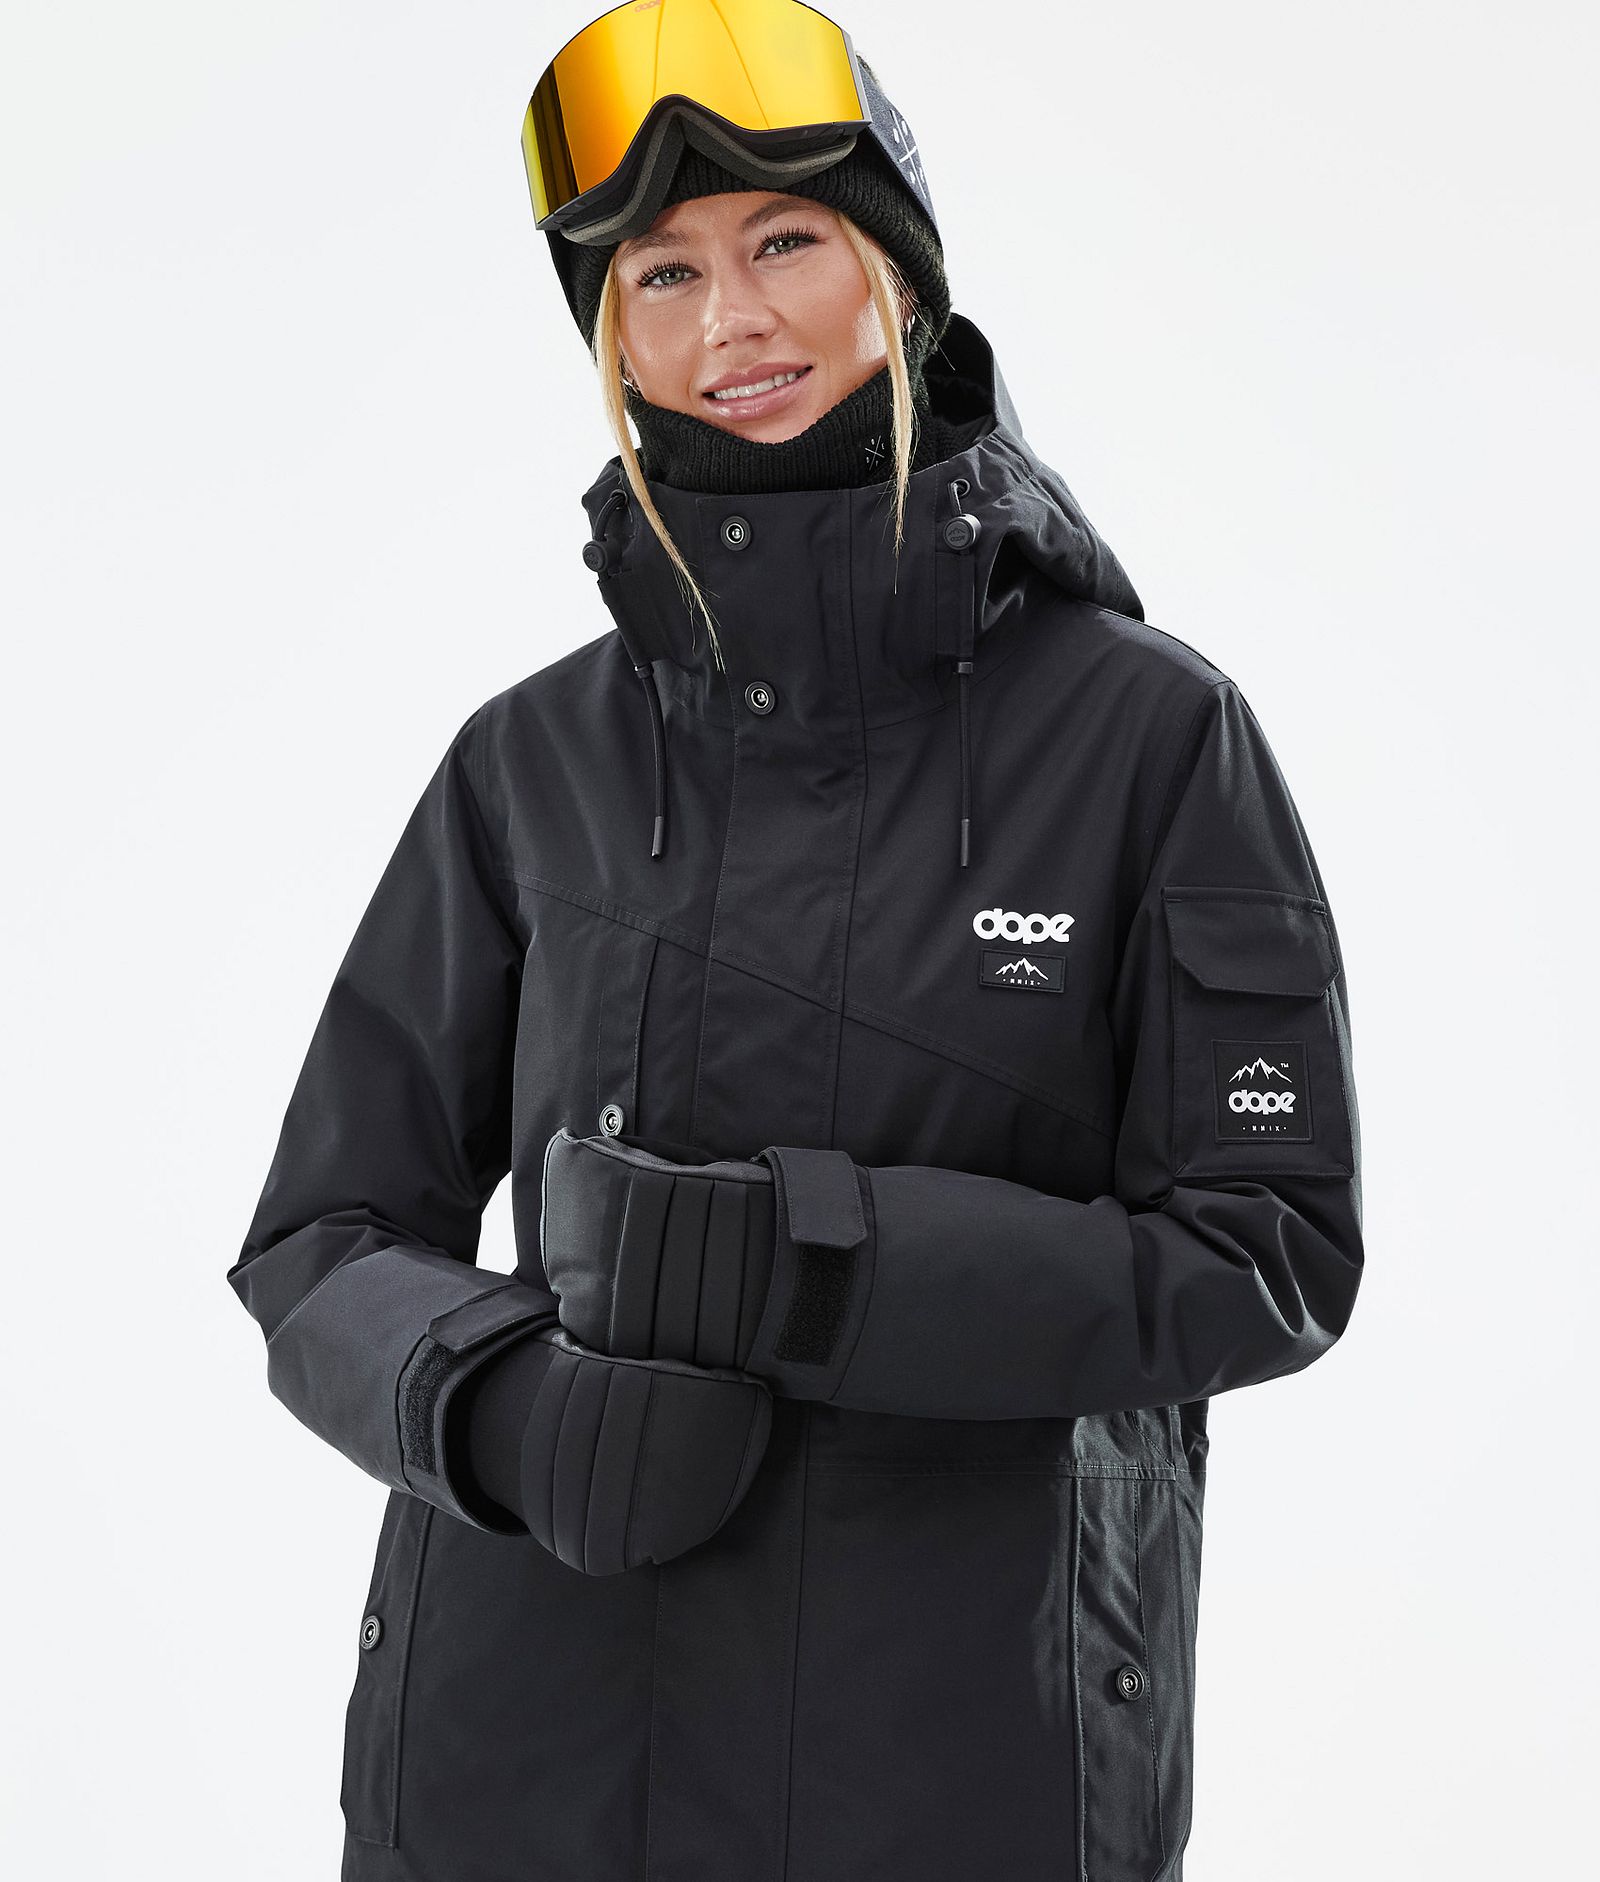 Adept W Giacca Snowboard Donna Blackout